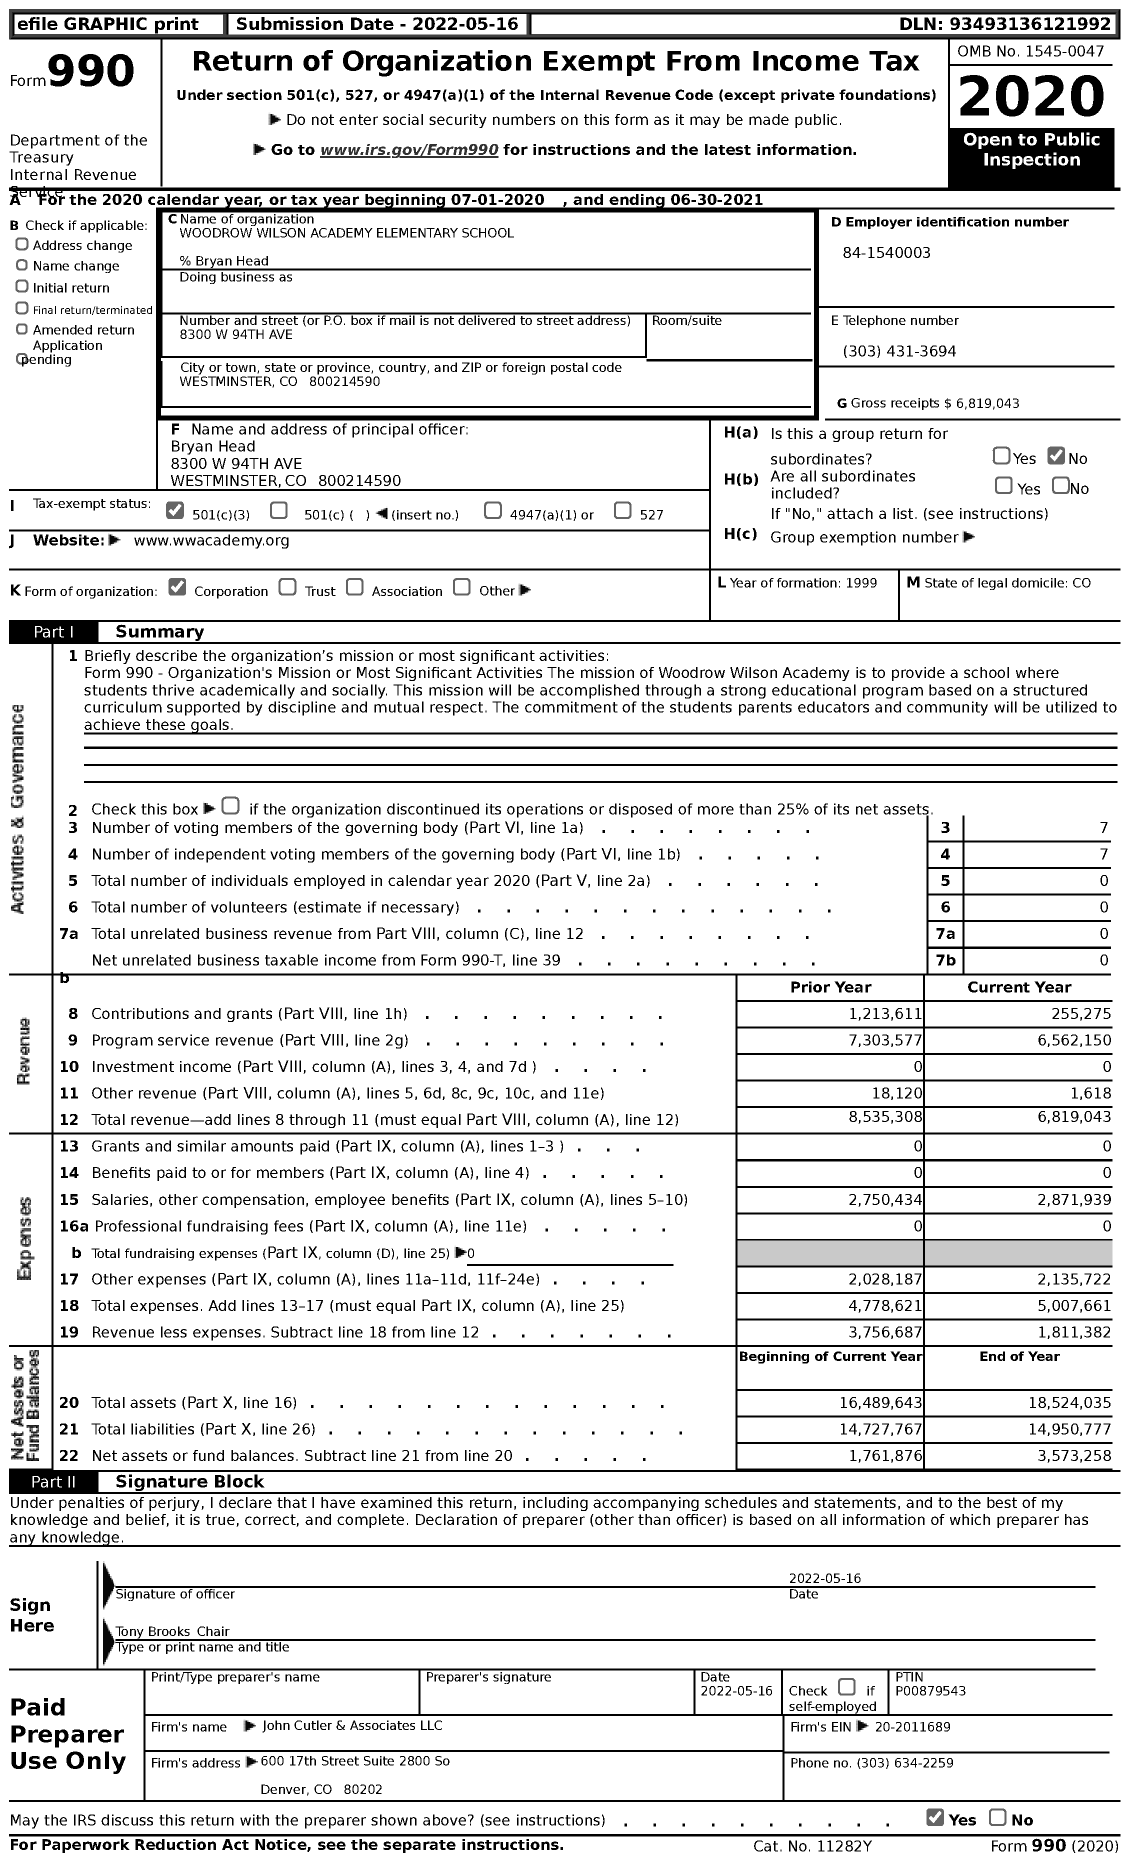 Image of first page of 2020 Form 990 for Woodrow Wilson Academy Elementary School (WWA)